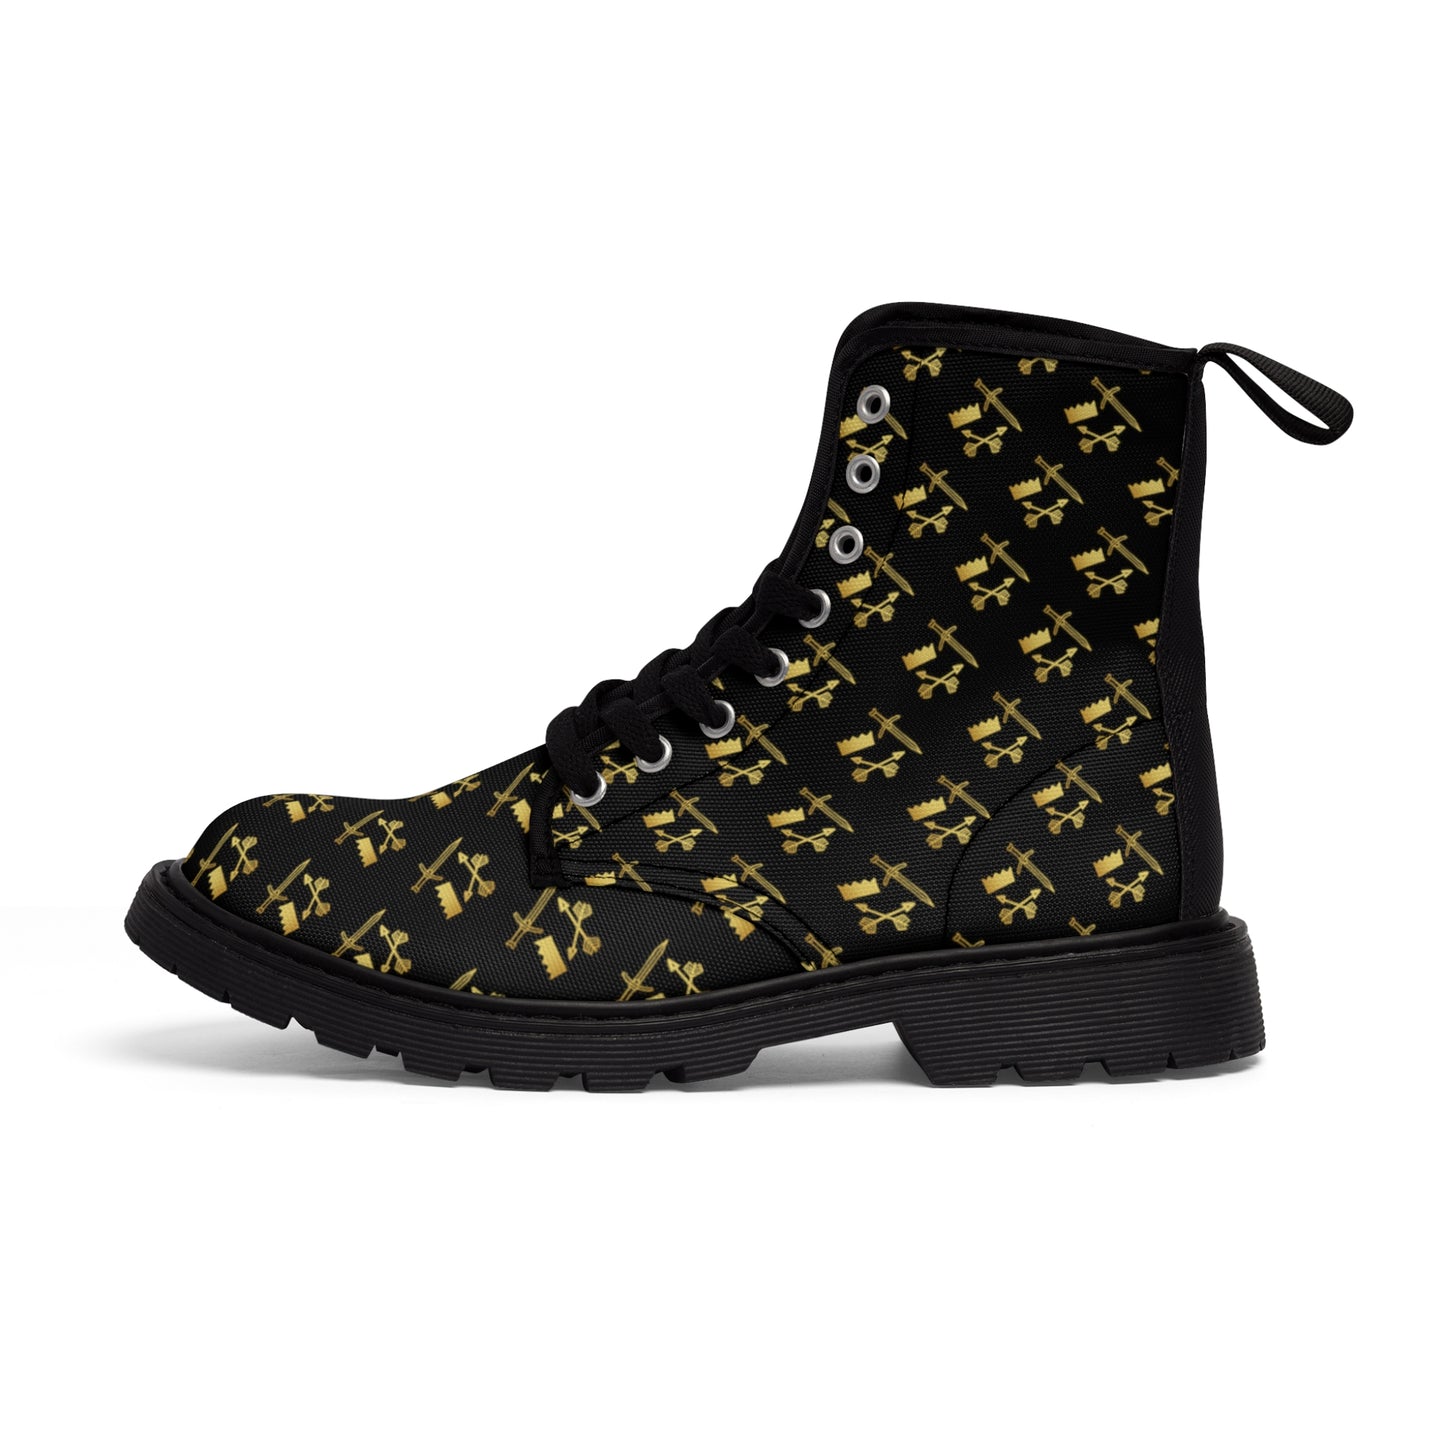 Men's - Gold and Bold Warrior - Martin Boots